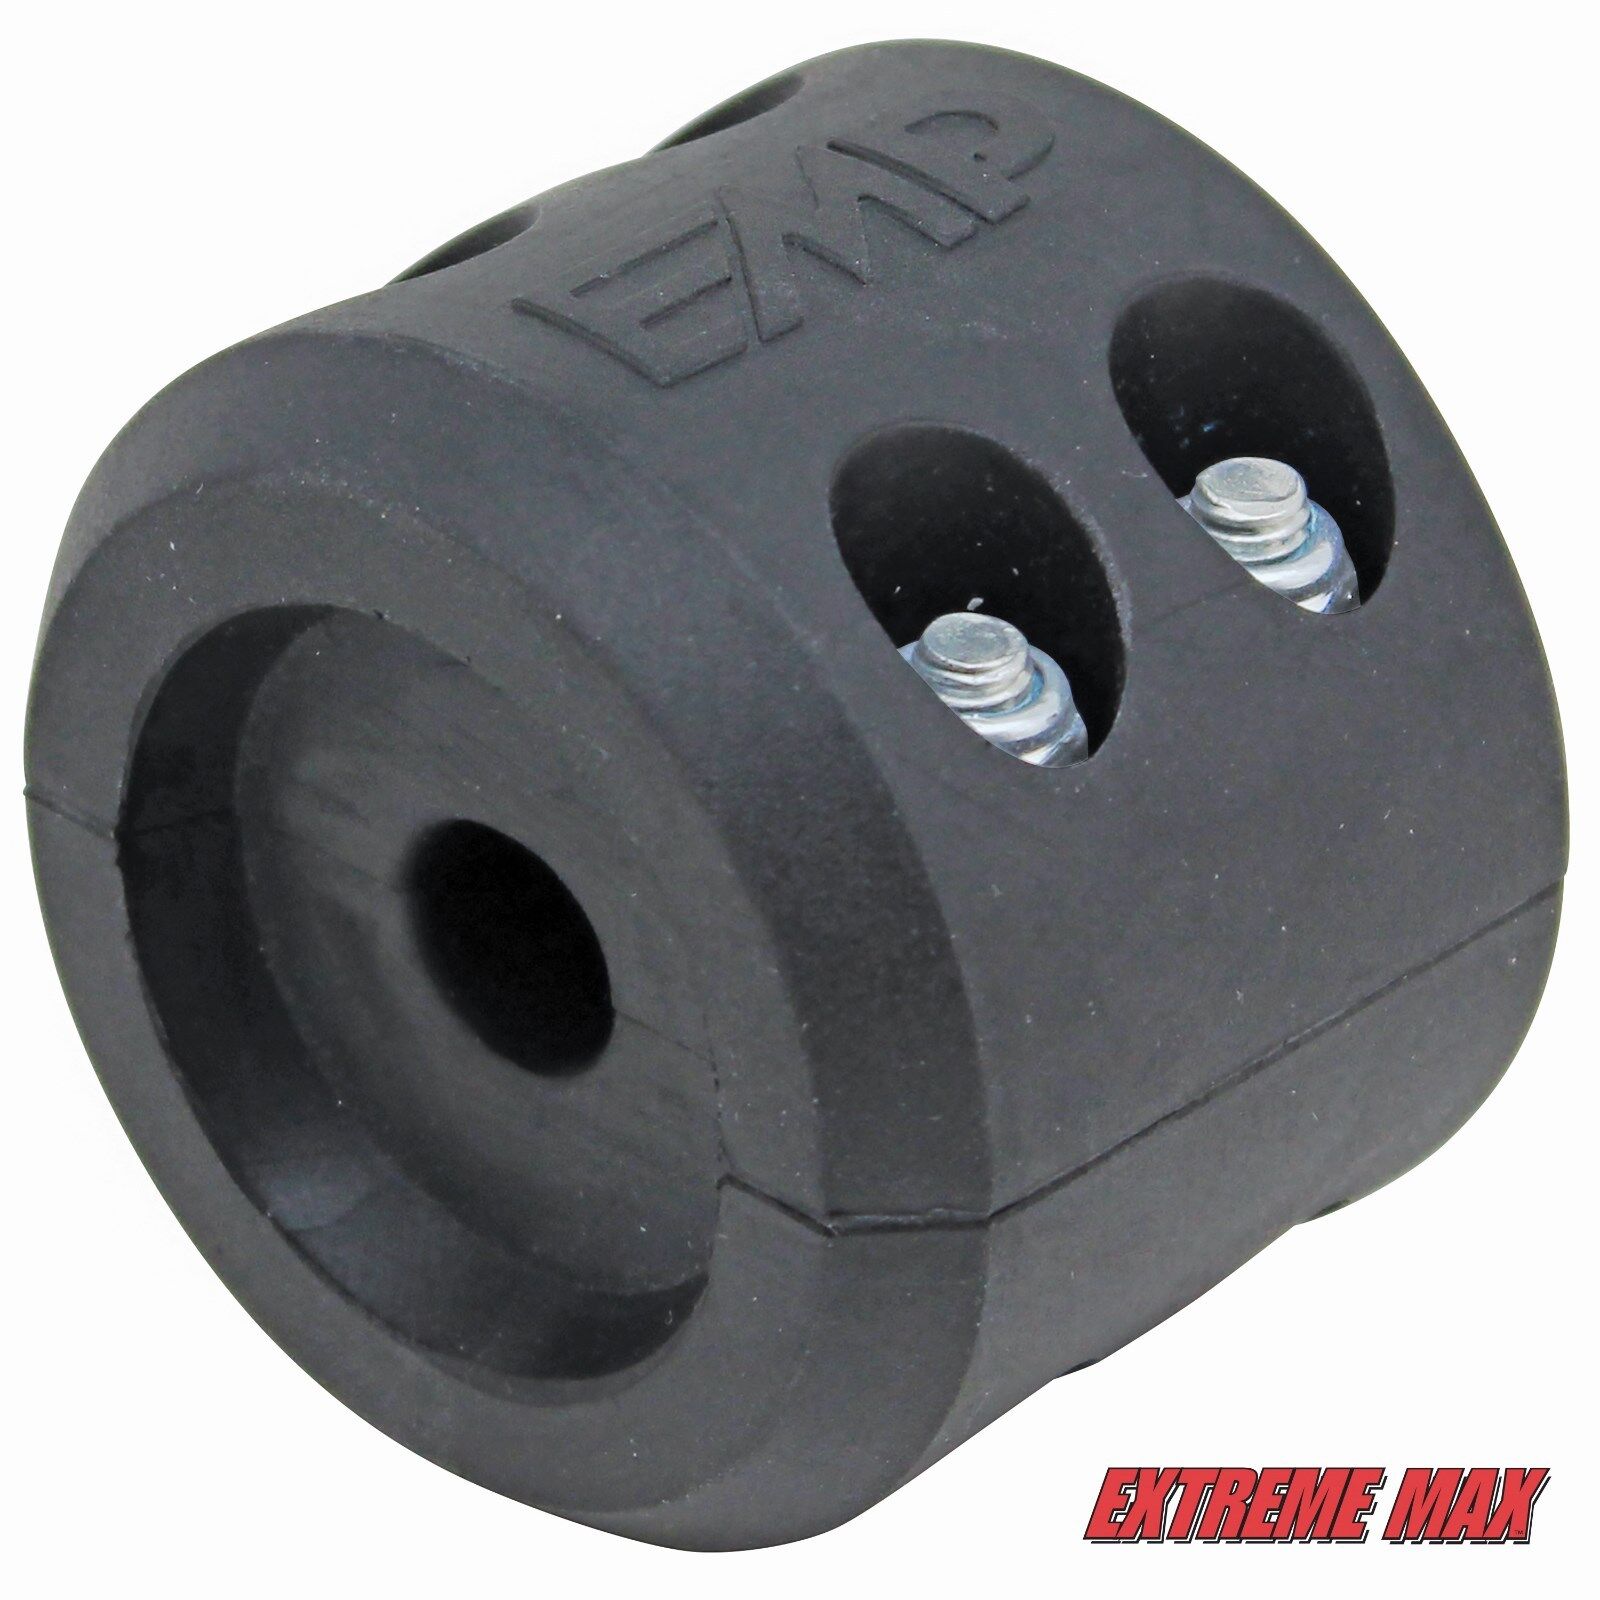 Extreme Max 2-Piece Quick-Install Hook Stopper & Line Saver for ATV/UTV Winches